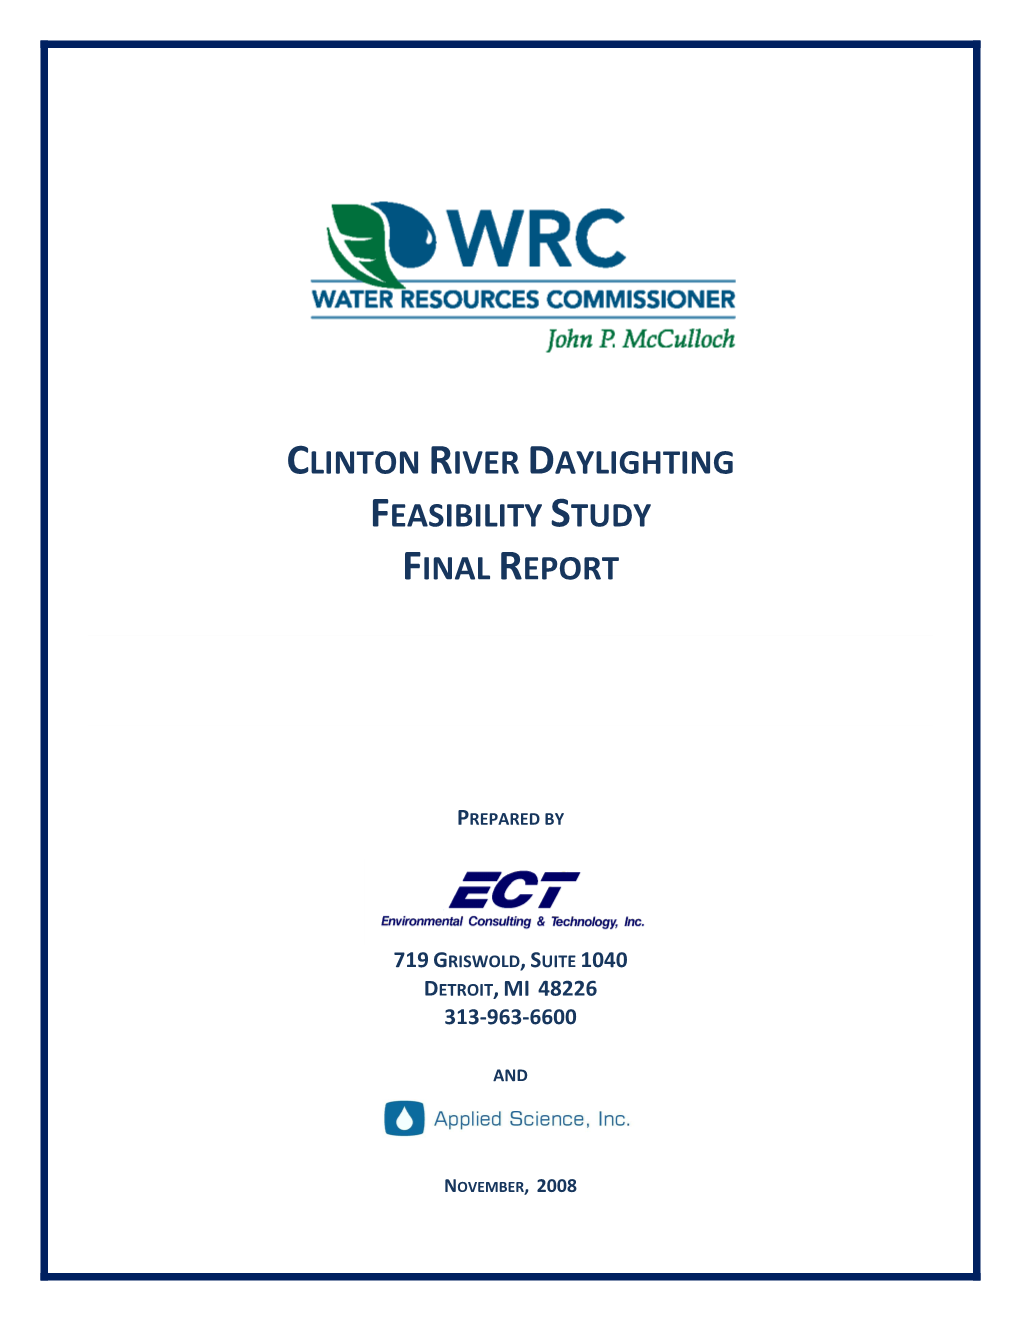 Clinton River Daylighting Feasibility Study Final Report